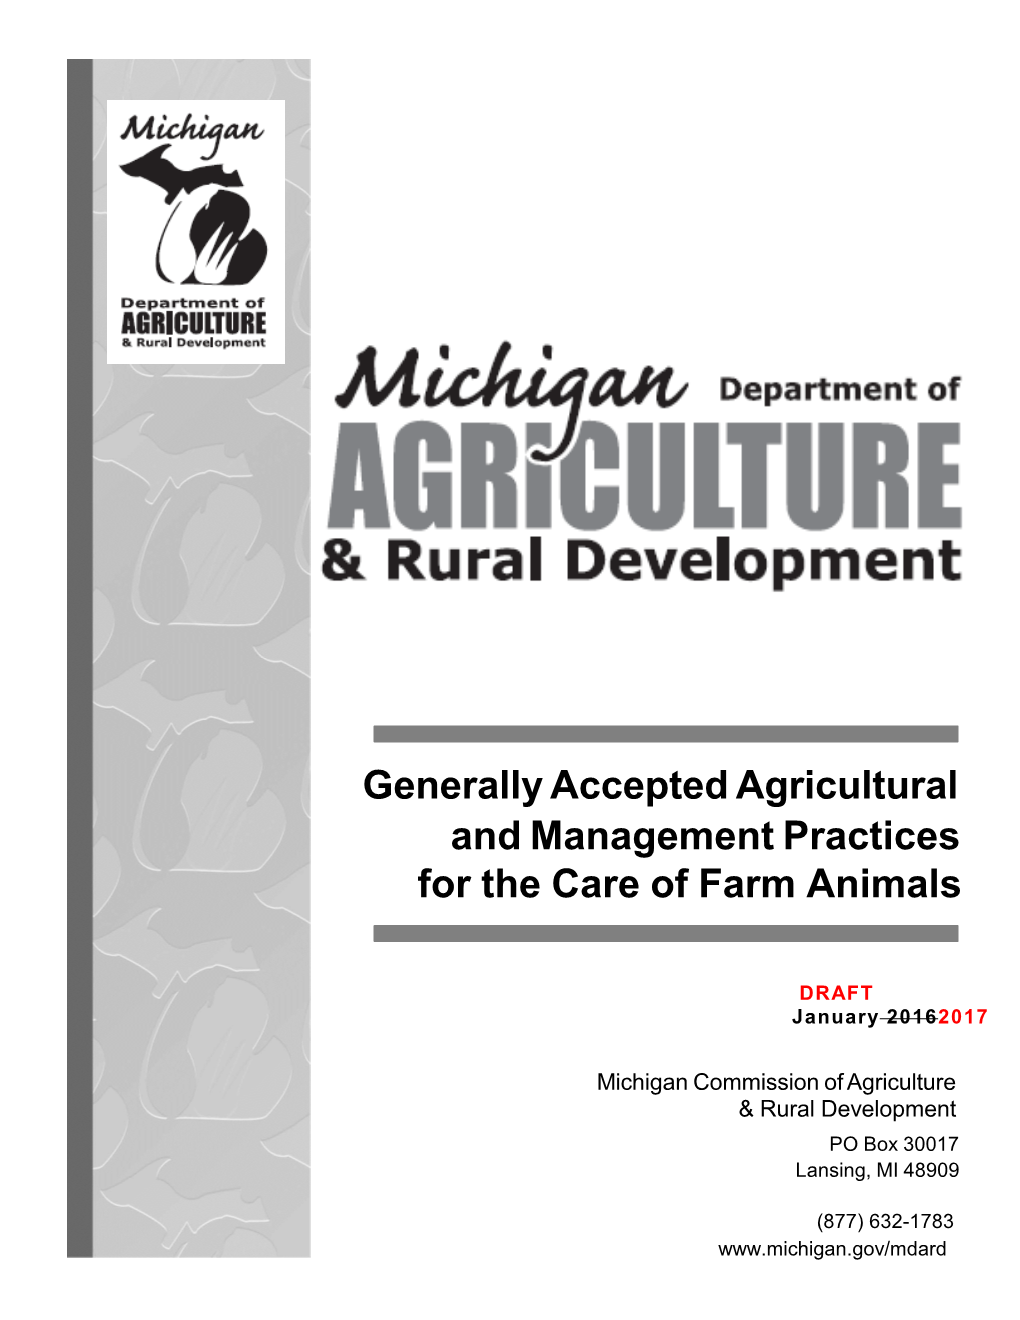 Generally Accepted Agricultural and Management Practices for the Care of Farm Animals